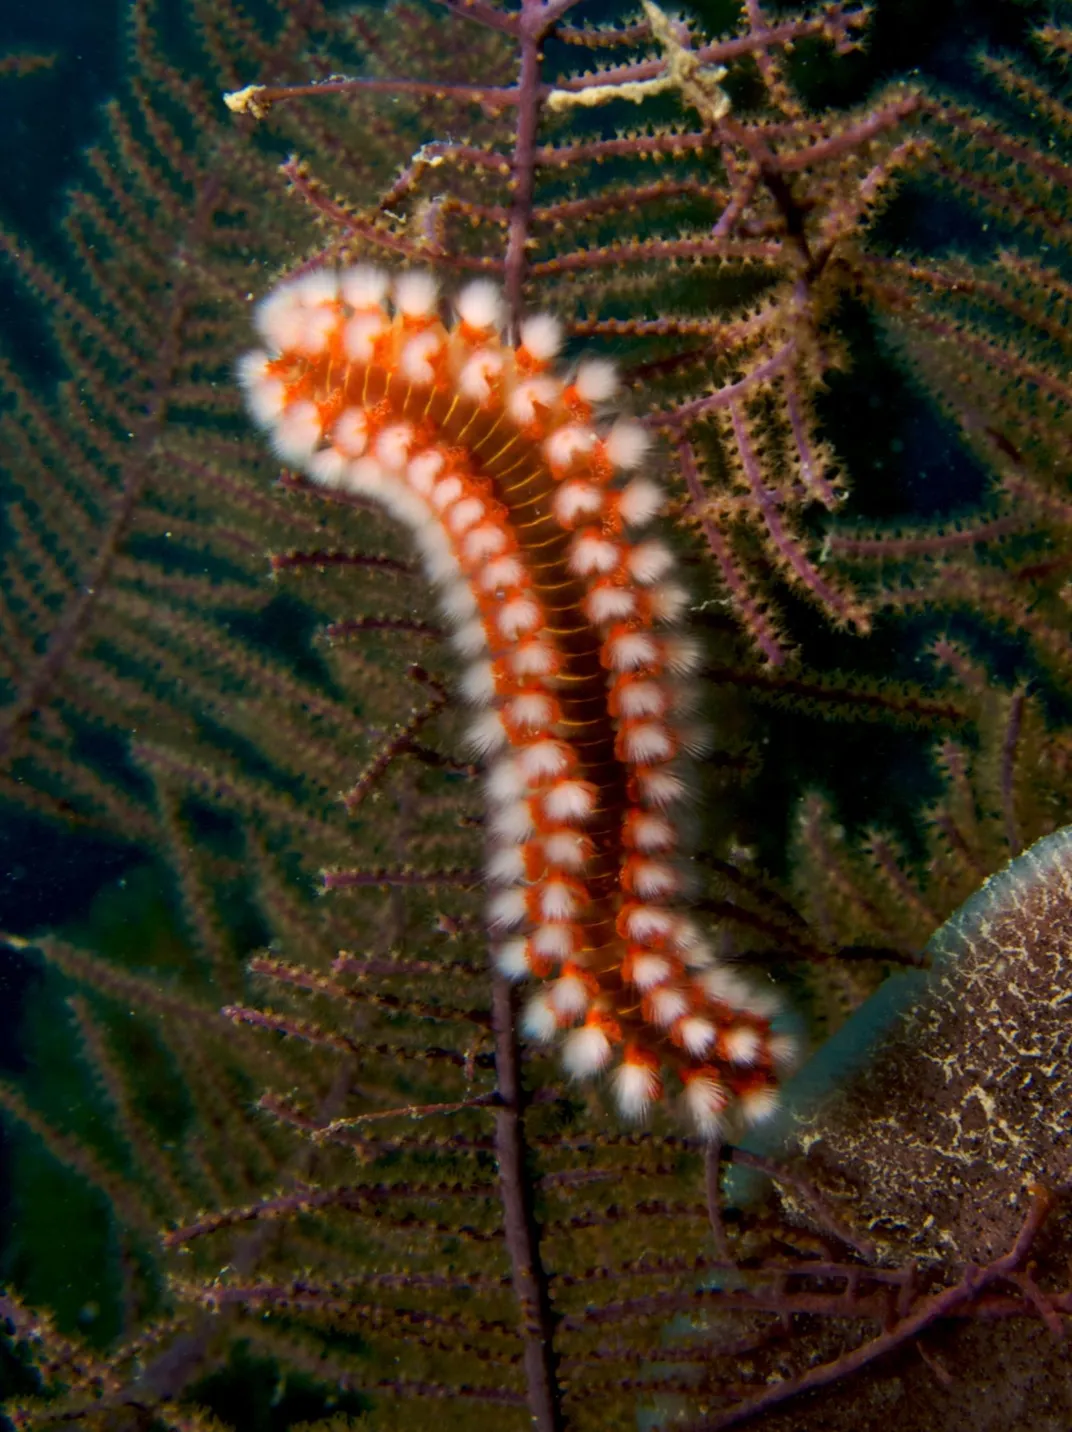 A fuzzy, red and white worm.